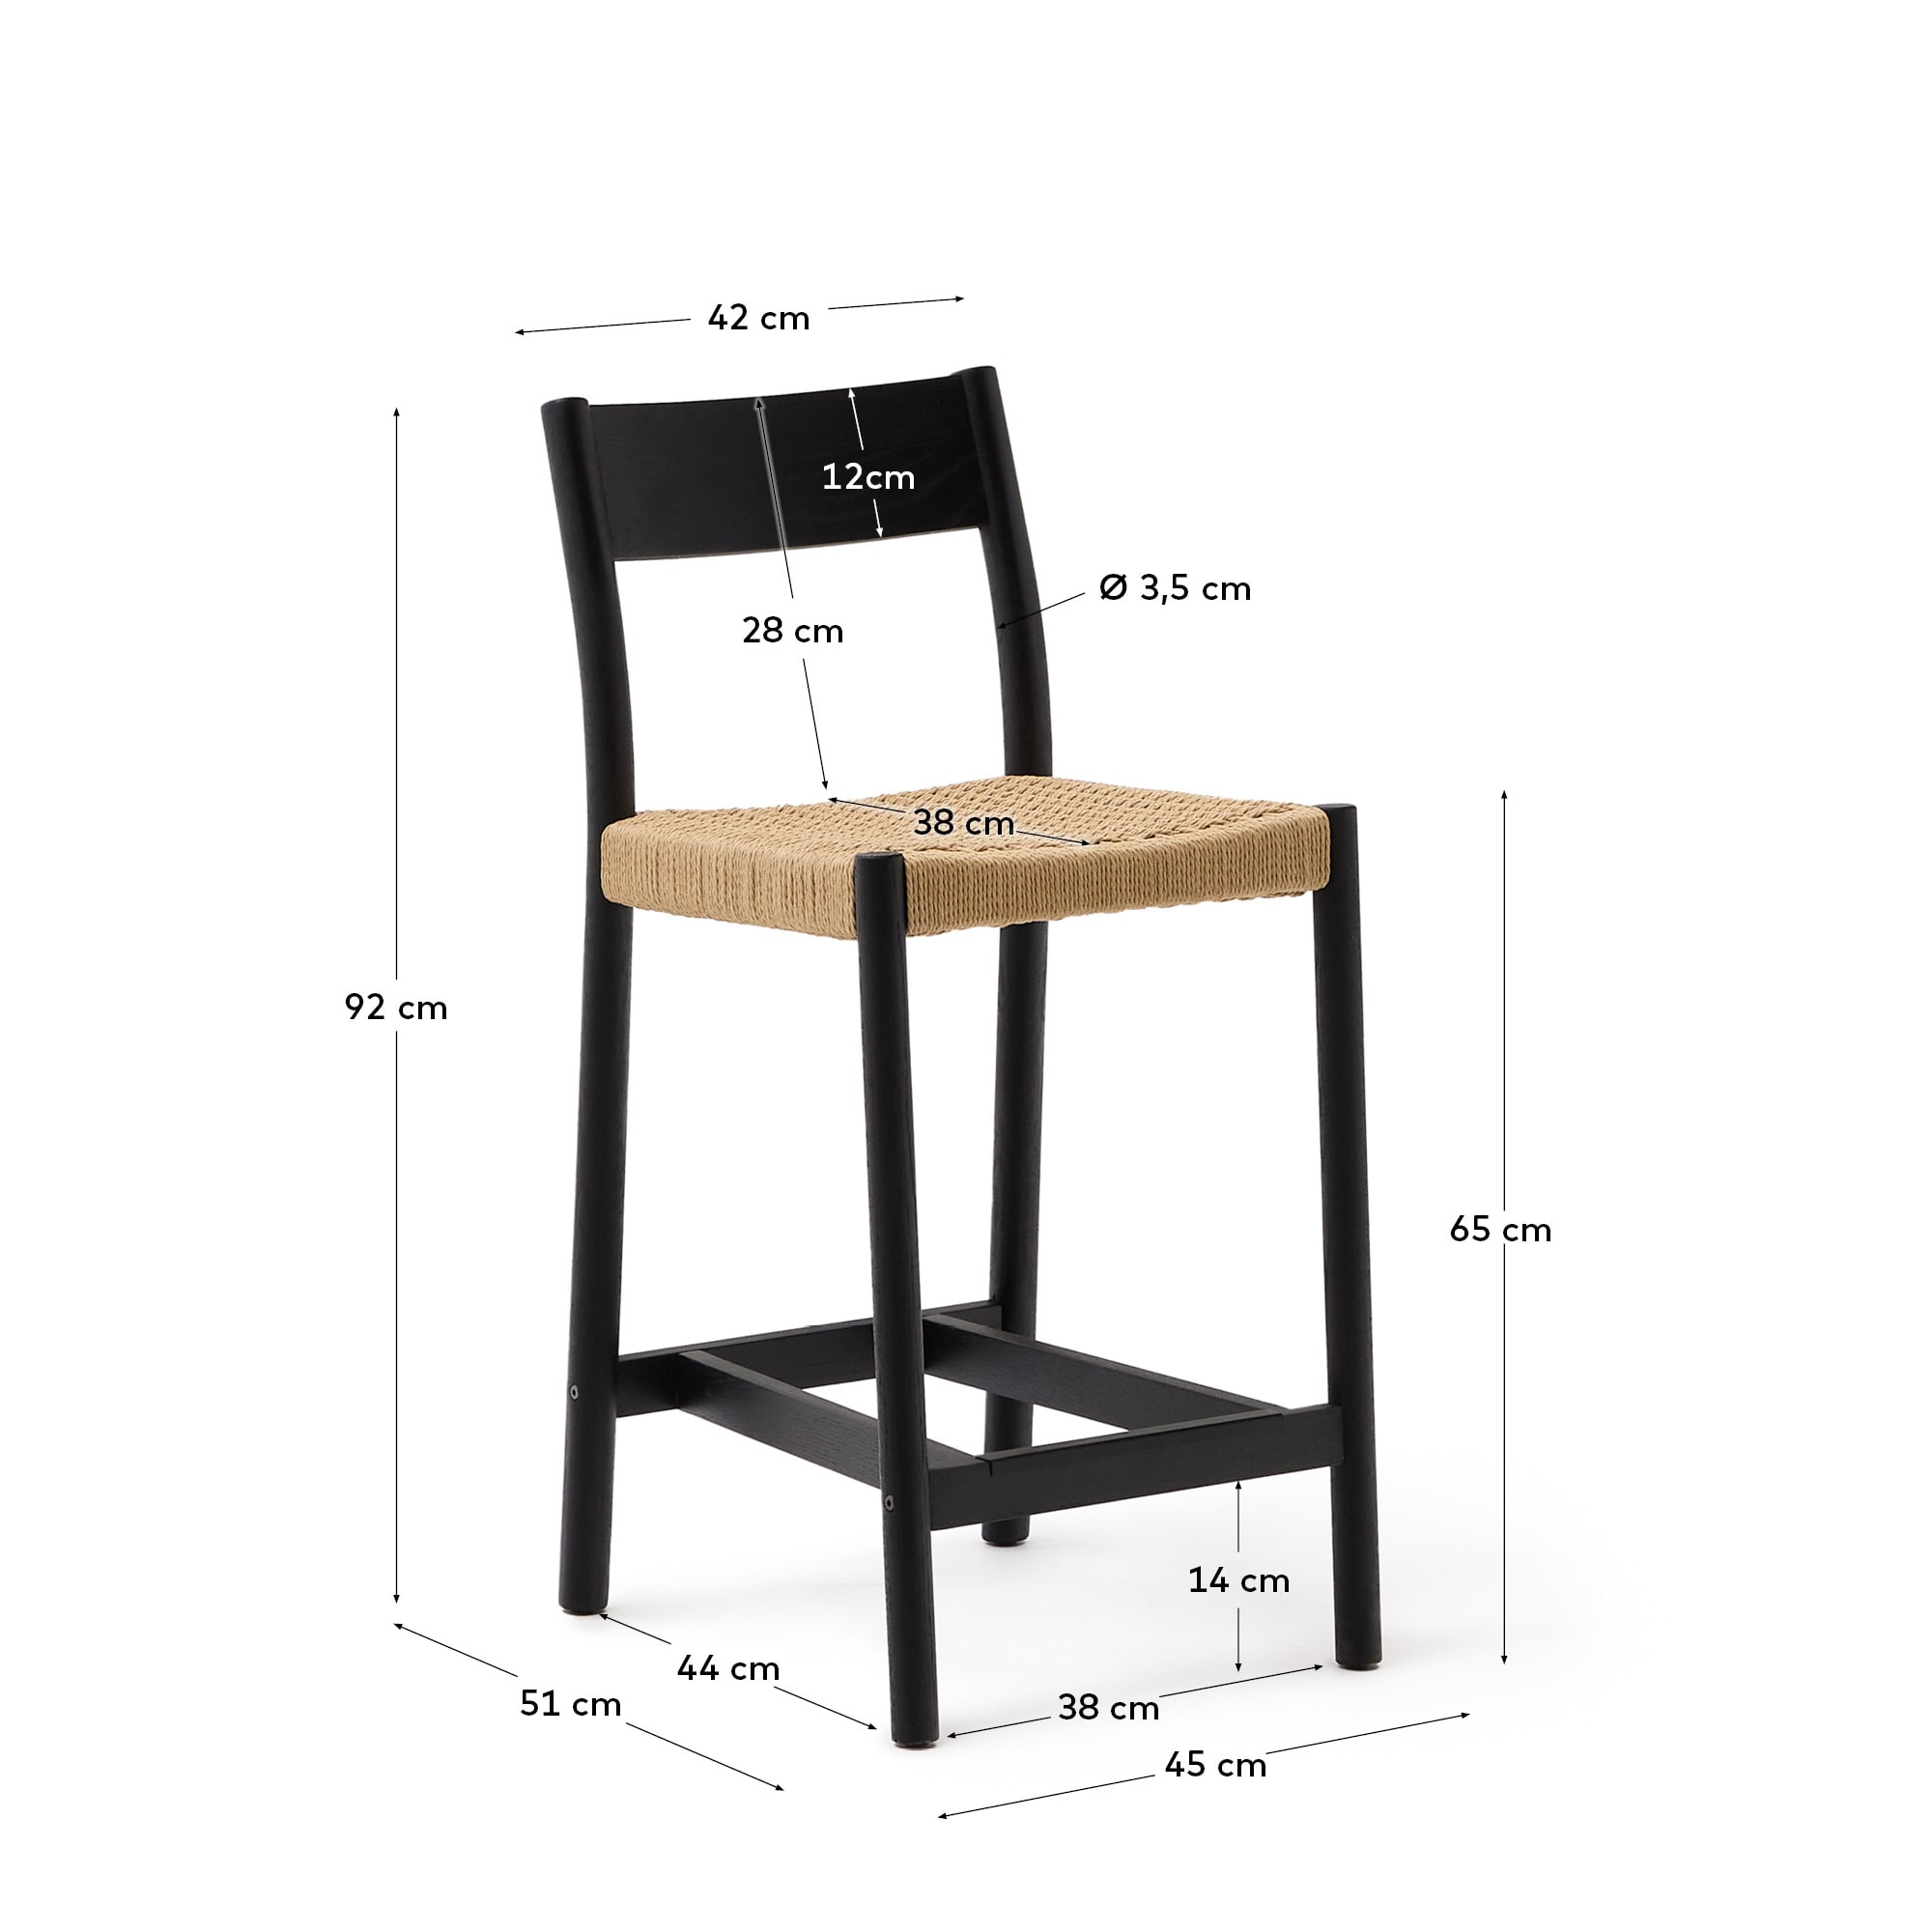 Yalia stool with a backrest in solid oak wood in a black finish, and rope cord seat, 65 cm 100% FSC - 크기